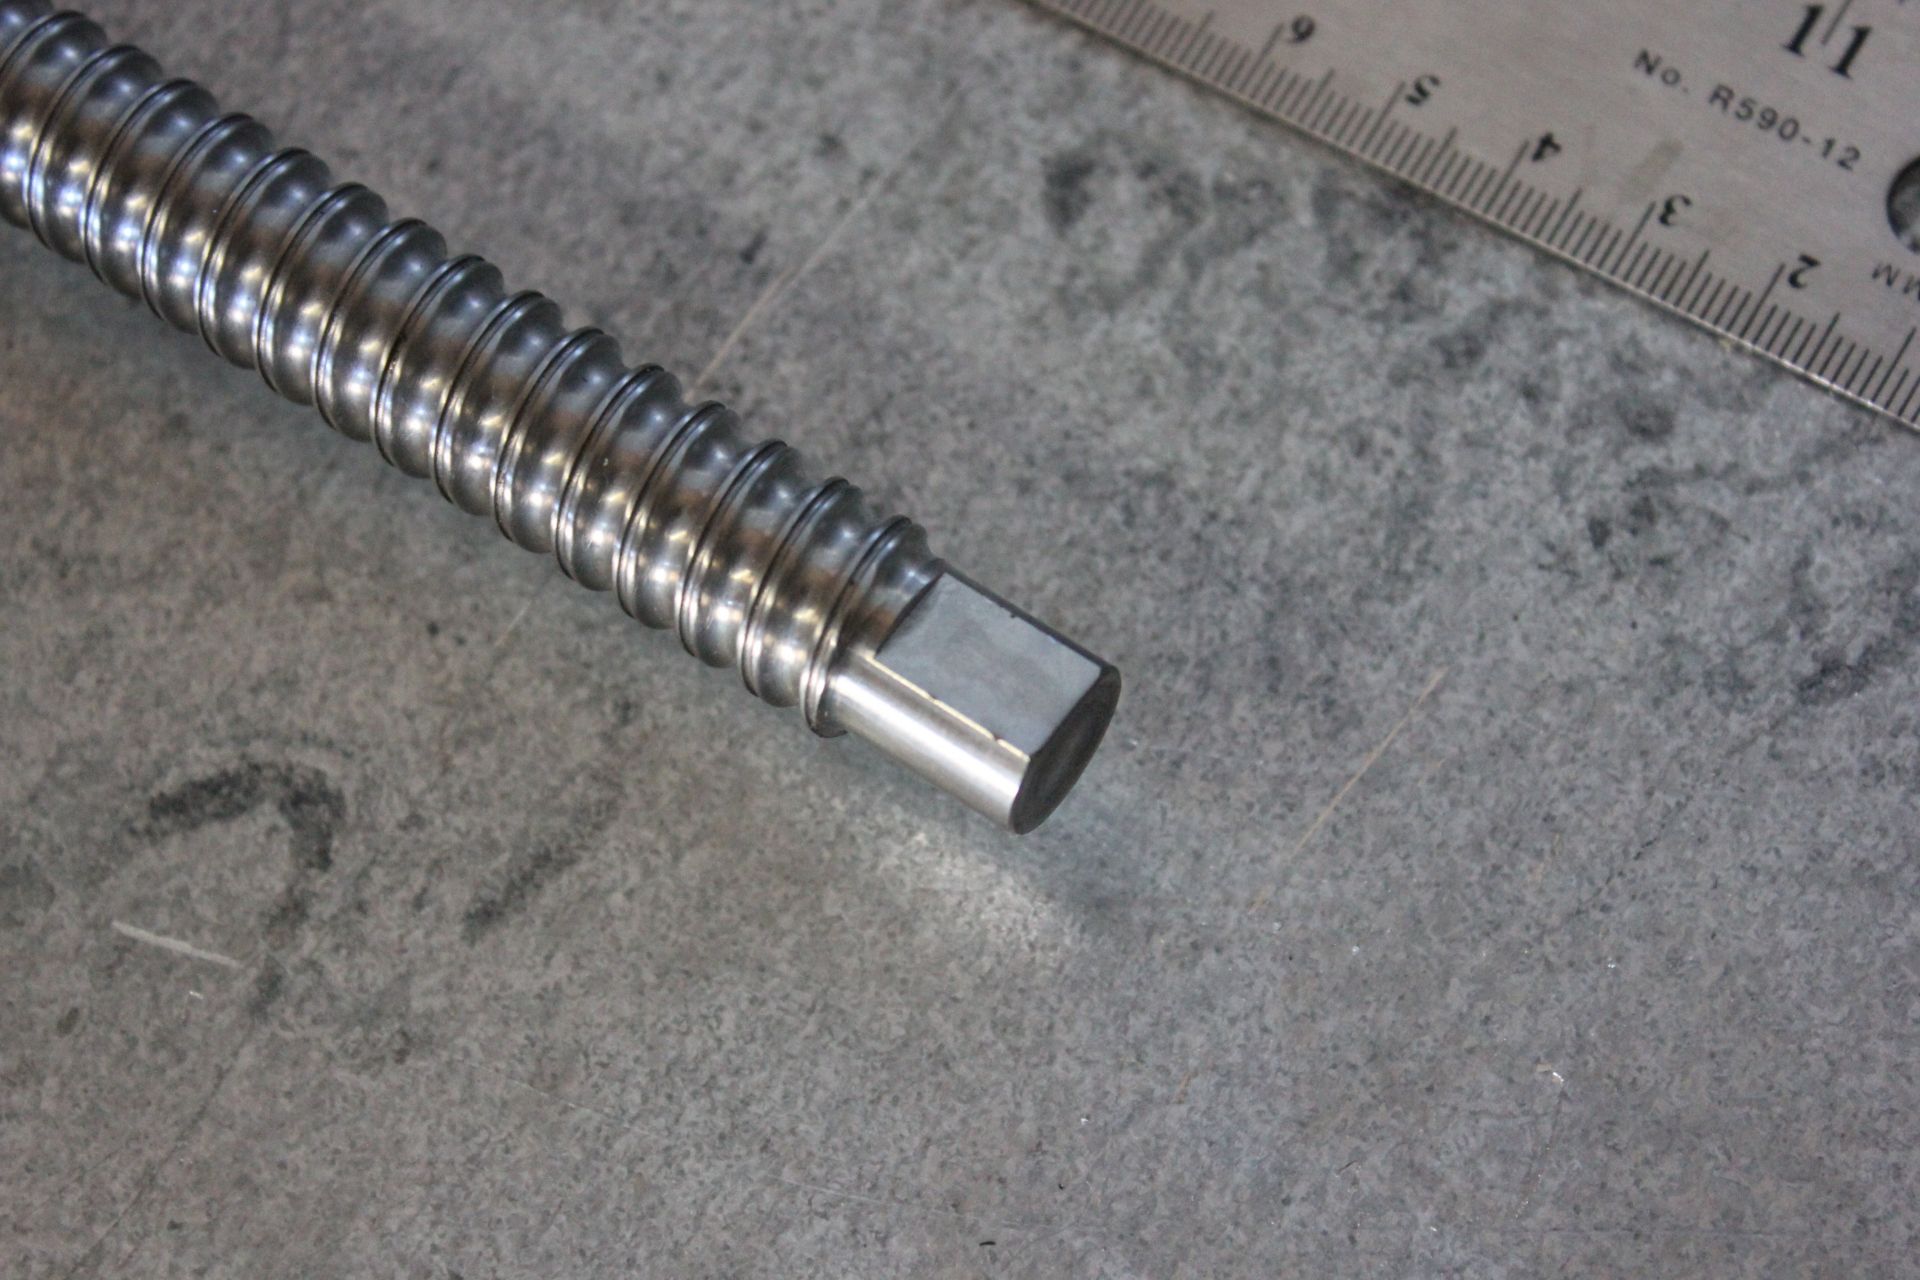 LOT OF NEW BALLSCREWS WITH BEARING NUTS - Image 6 of 7